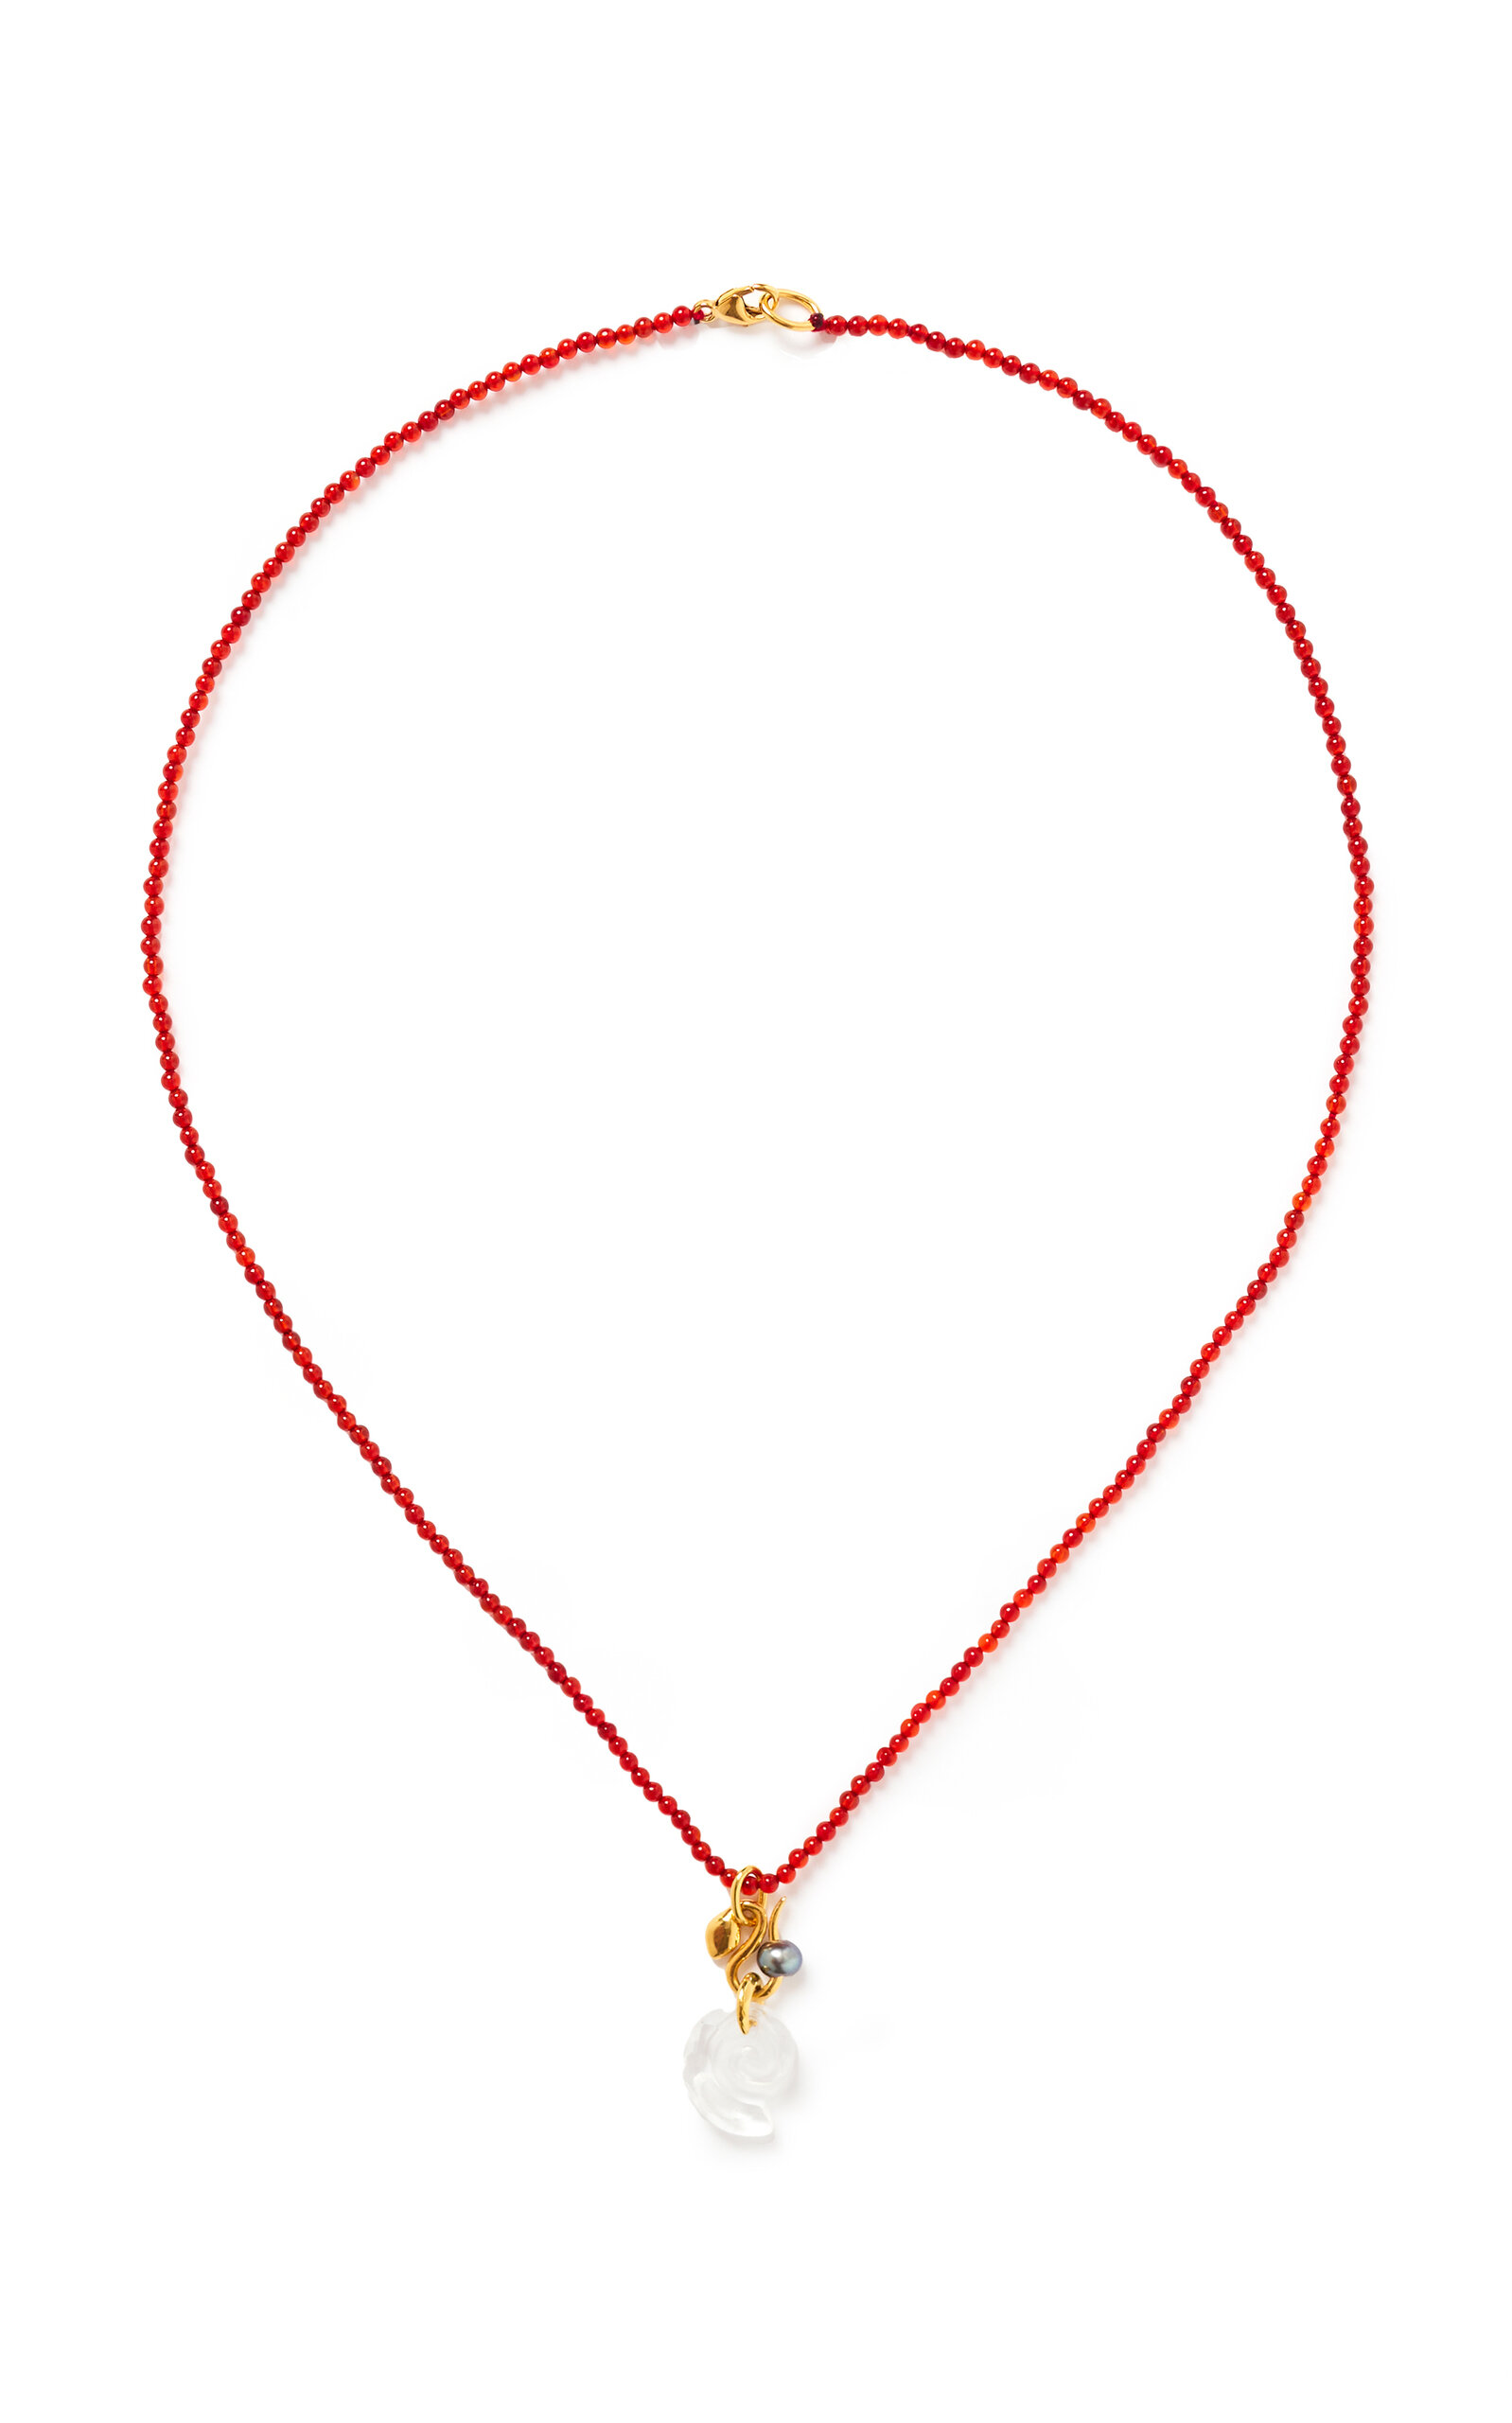 Exclusive Leila 18K Gold-Plated Carnelian Necklace